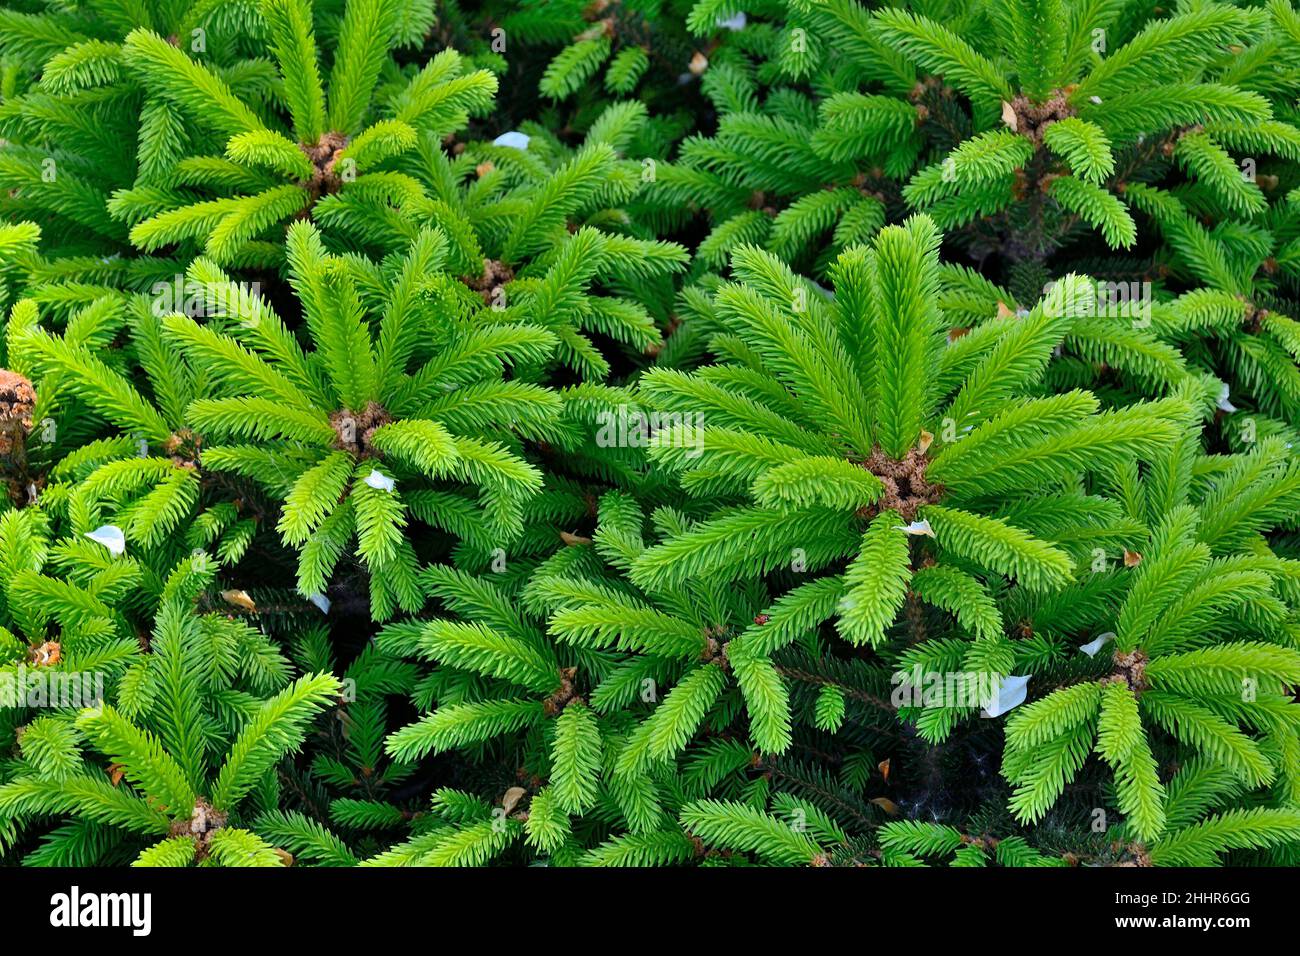 Dwarf spruce Picea abies with soft pale green spring needles on fir shoots texture, close up. Ornamental evergreen coniferous plant for garden landsca Stock Photo